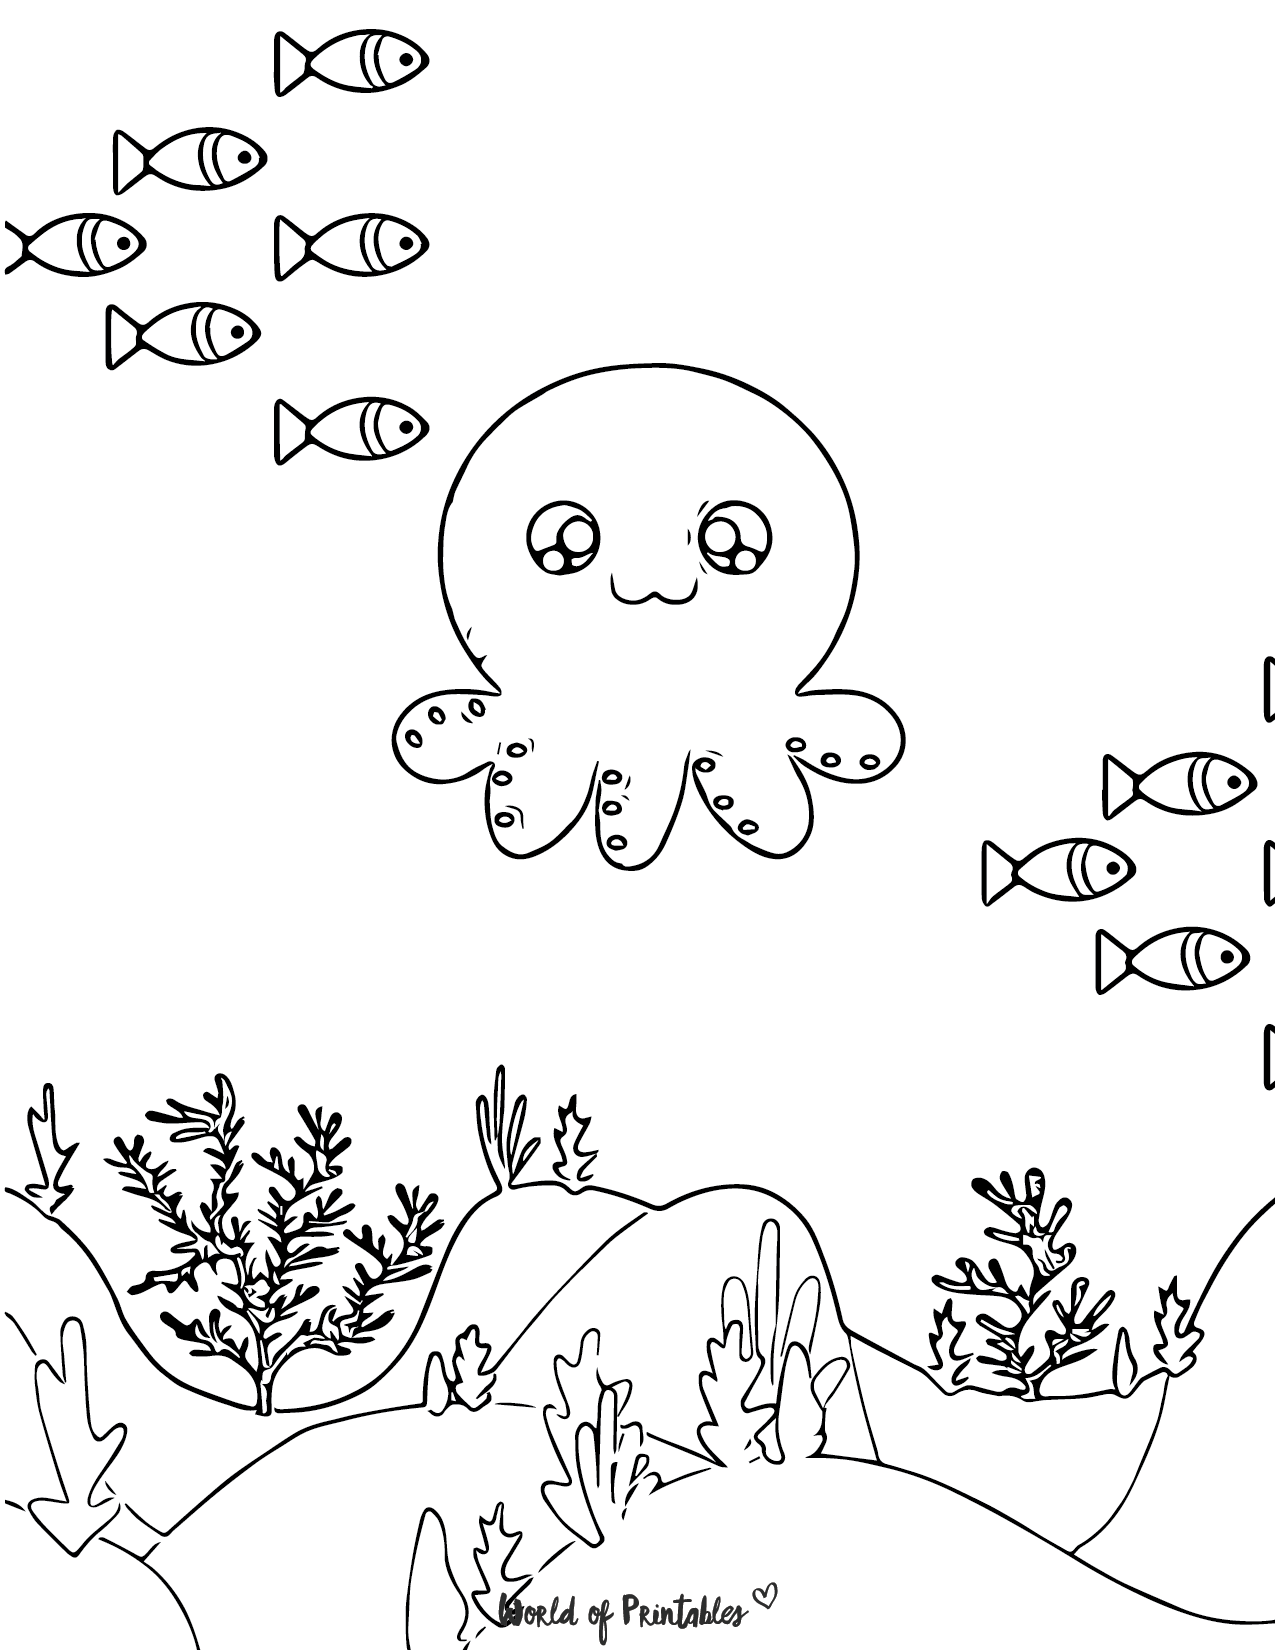 Octopus Coloring Pages - World of Printables